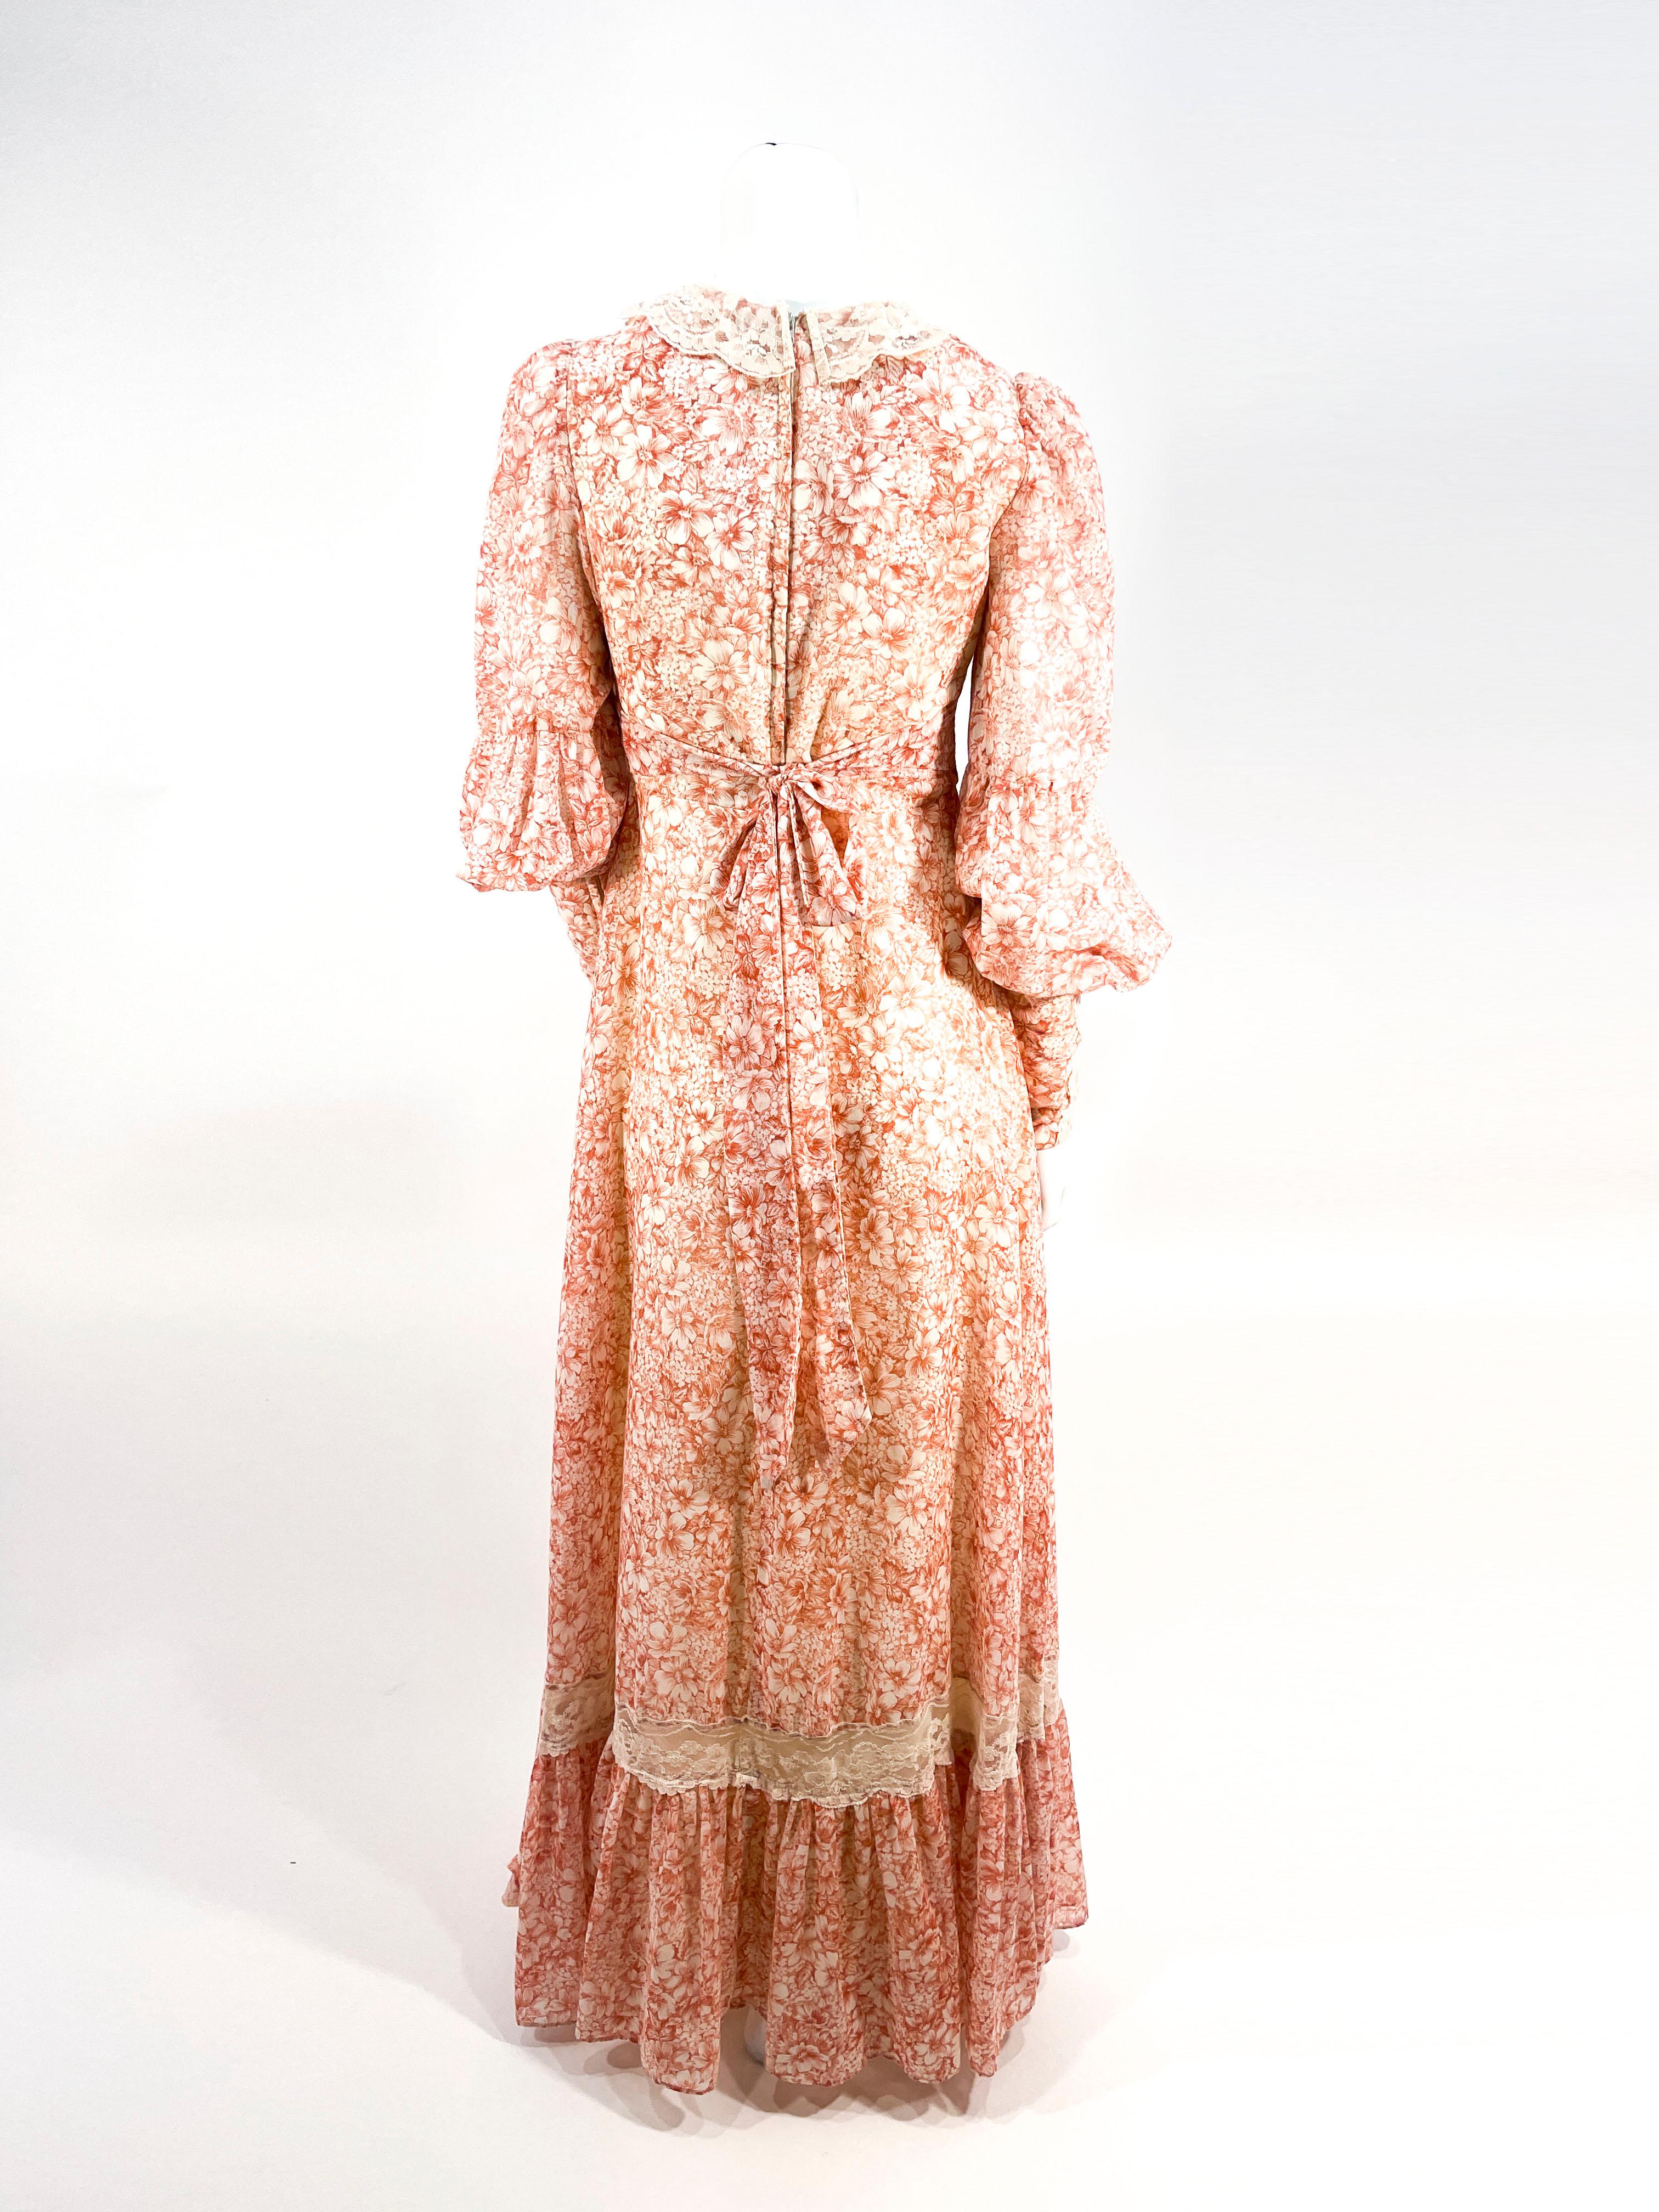 1970s Gunne Sax Floral Printed Cotton Day Dress In Good Condition For Sale In San Francisco, CA